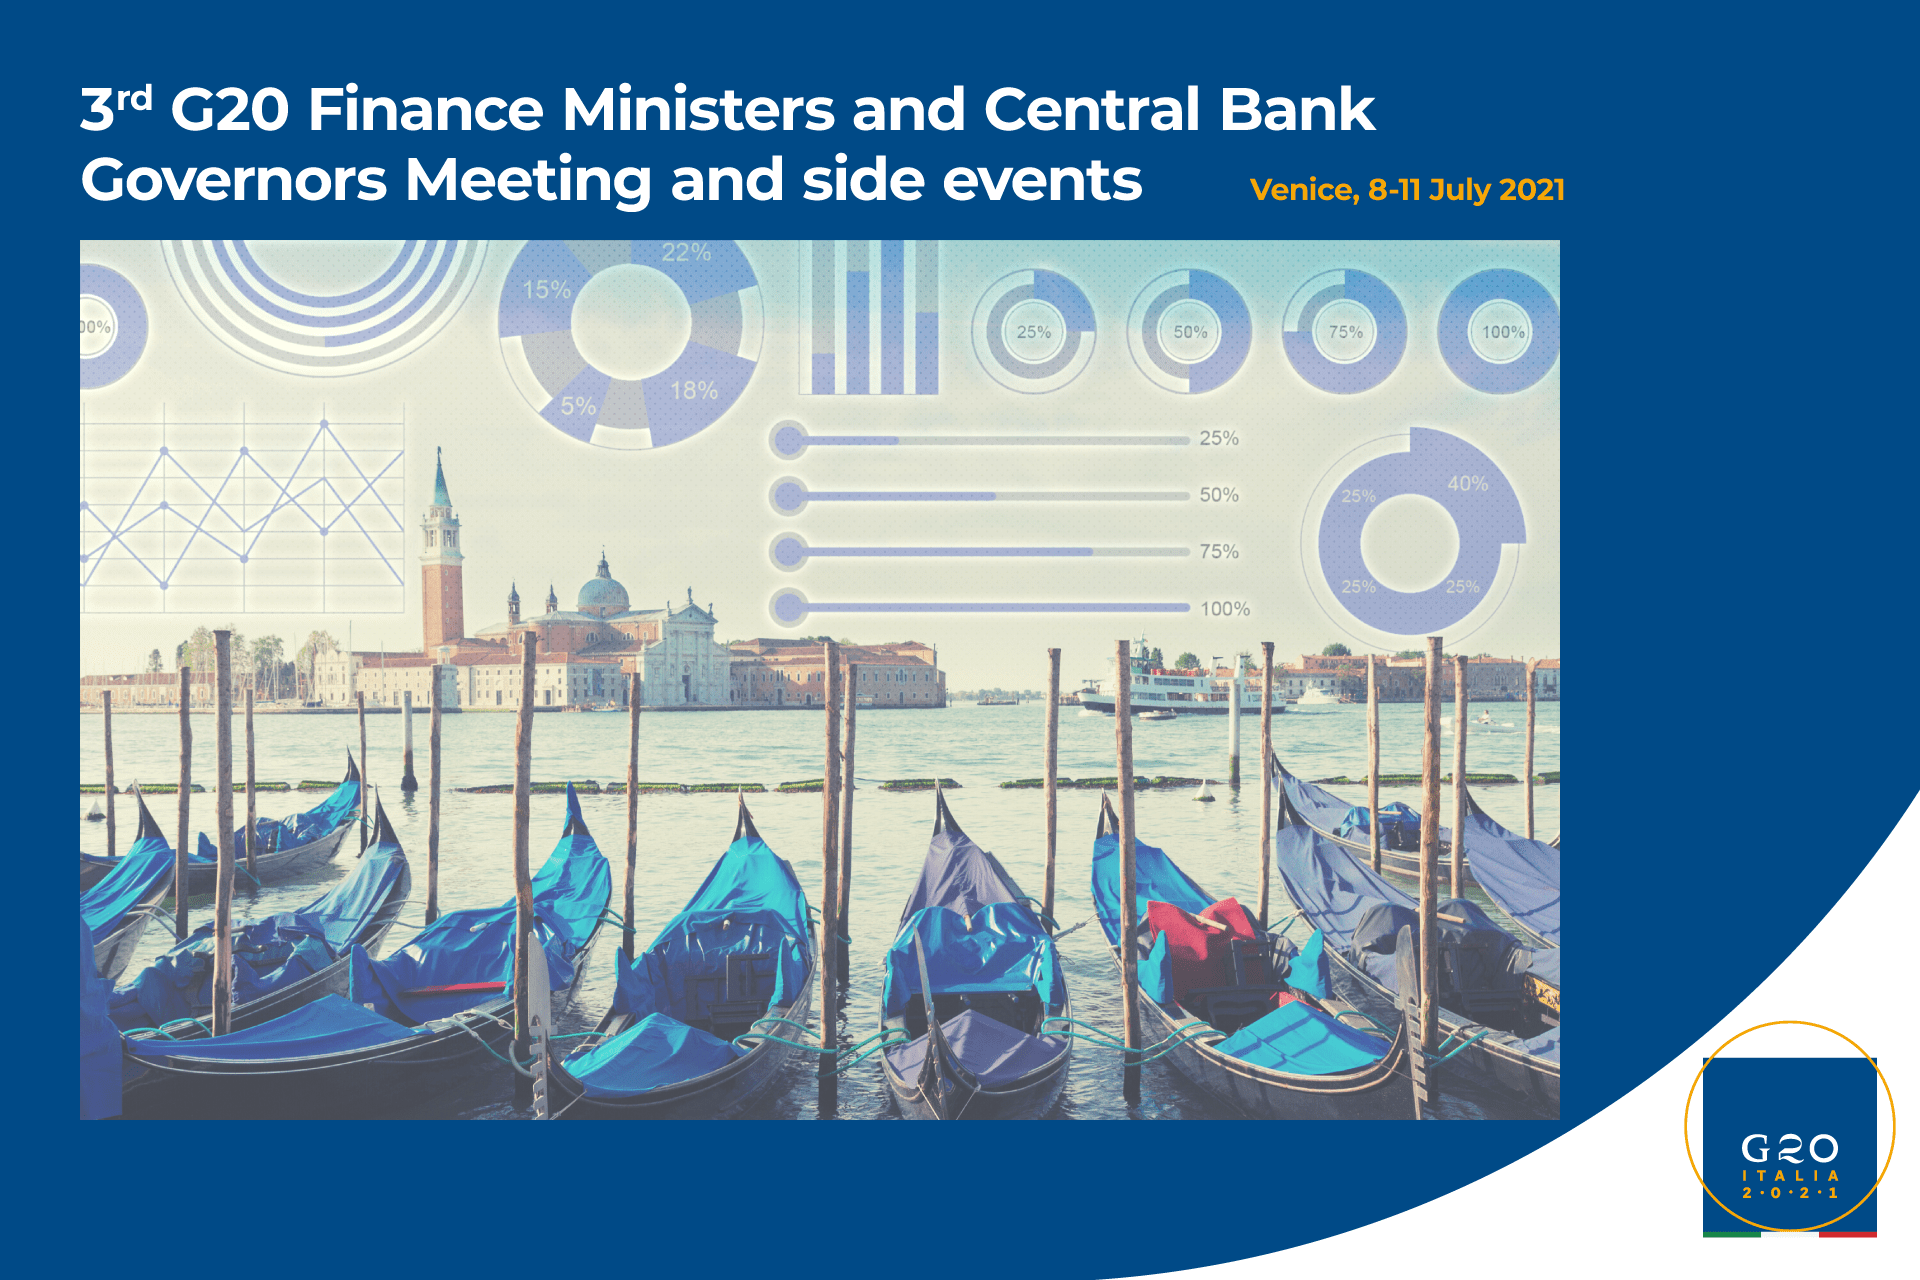 G20 Finance Ministers and Central Bank Governors Venice Meeting and side events